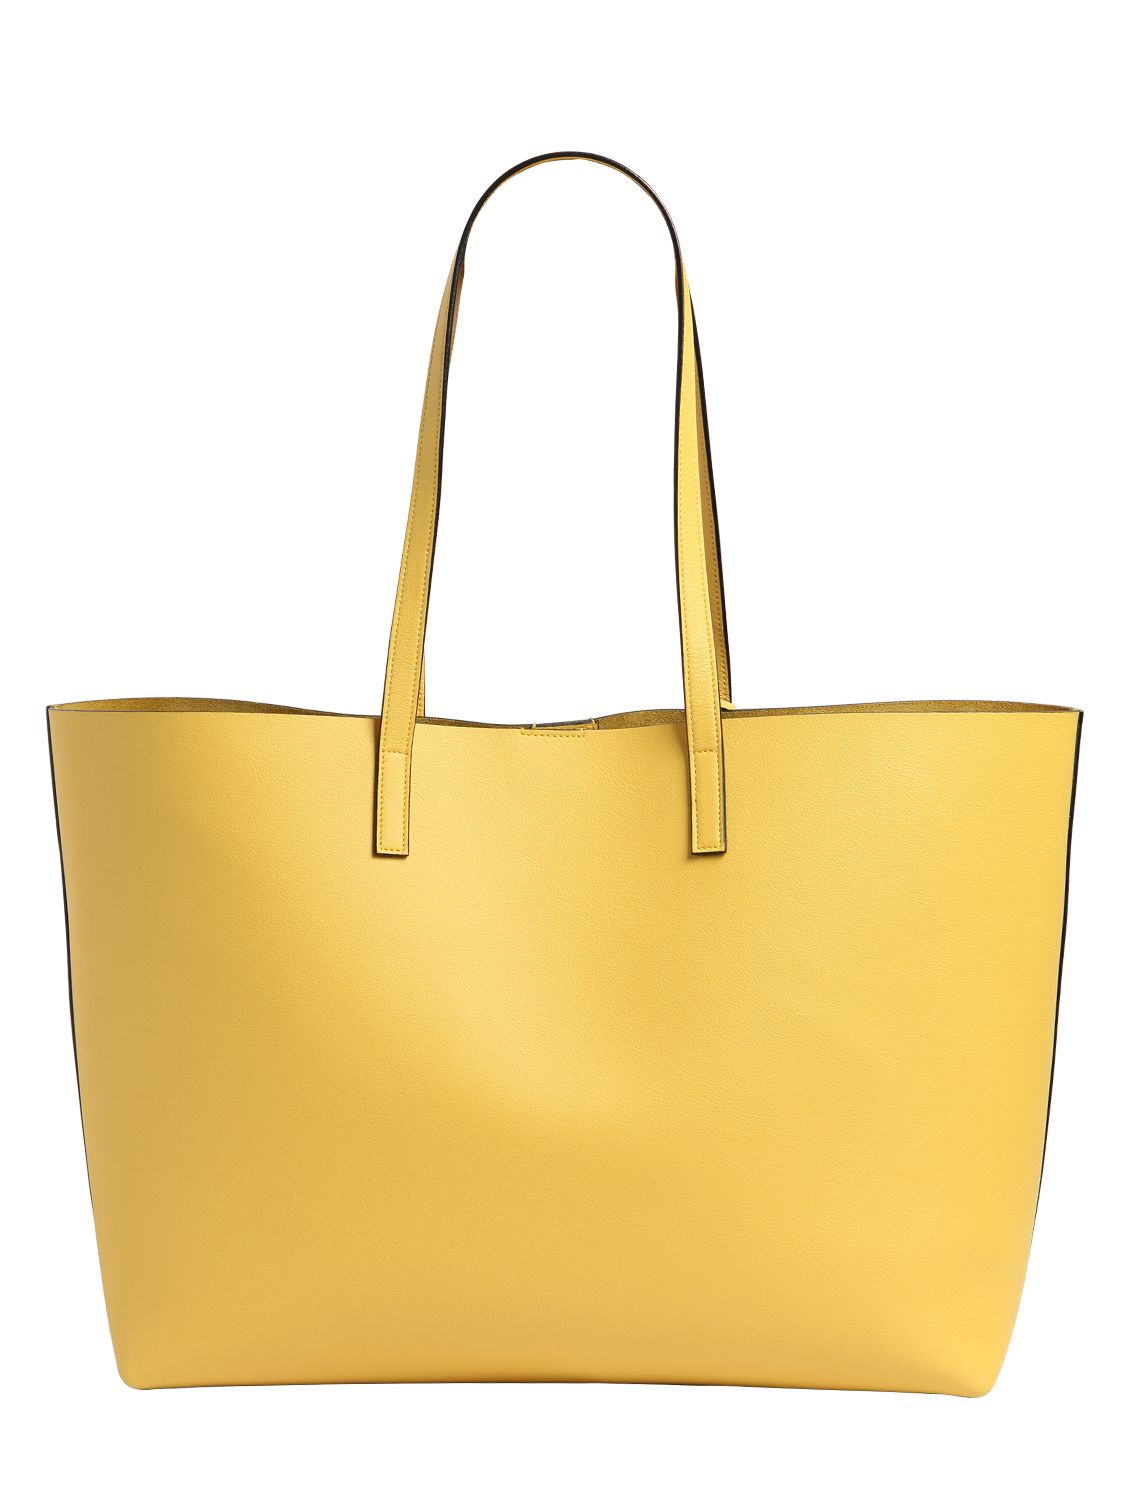 Saint Laurent Soft Leather Tote Bag in Yellow - Lyst